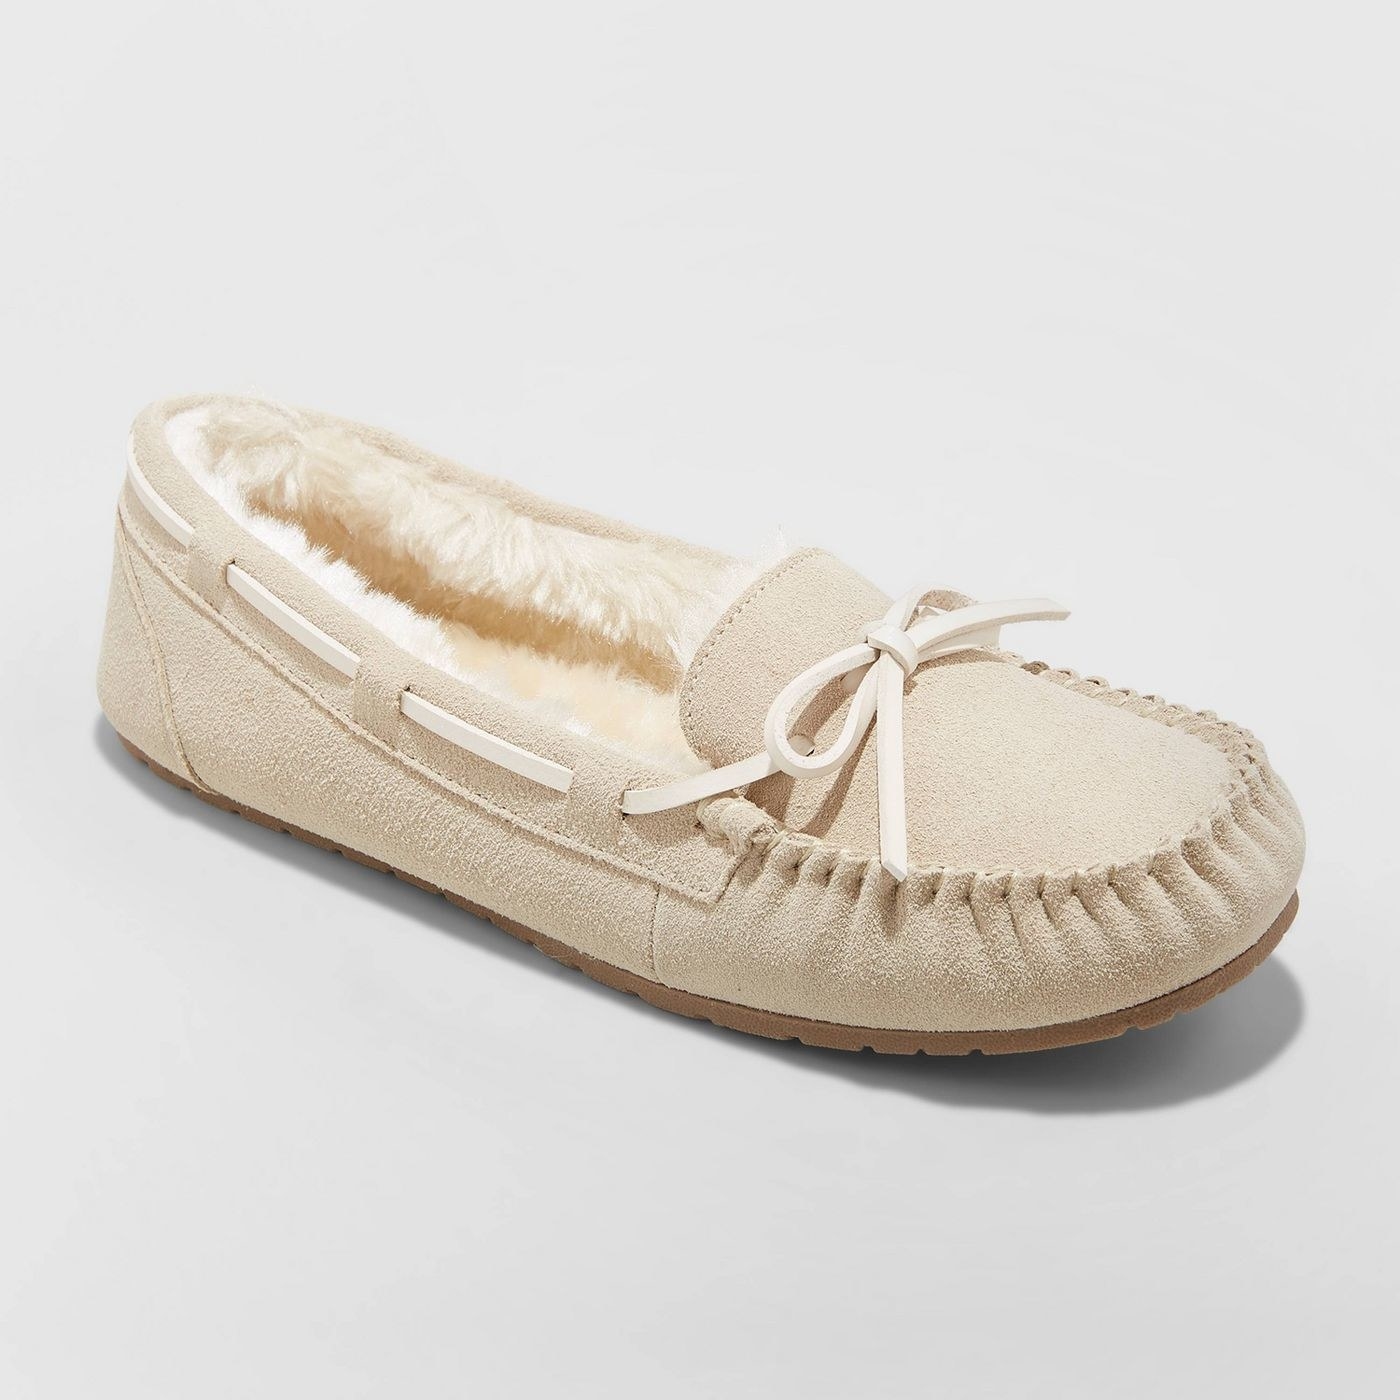 A sand suede moccasin slipper